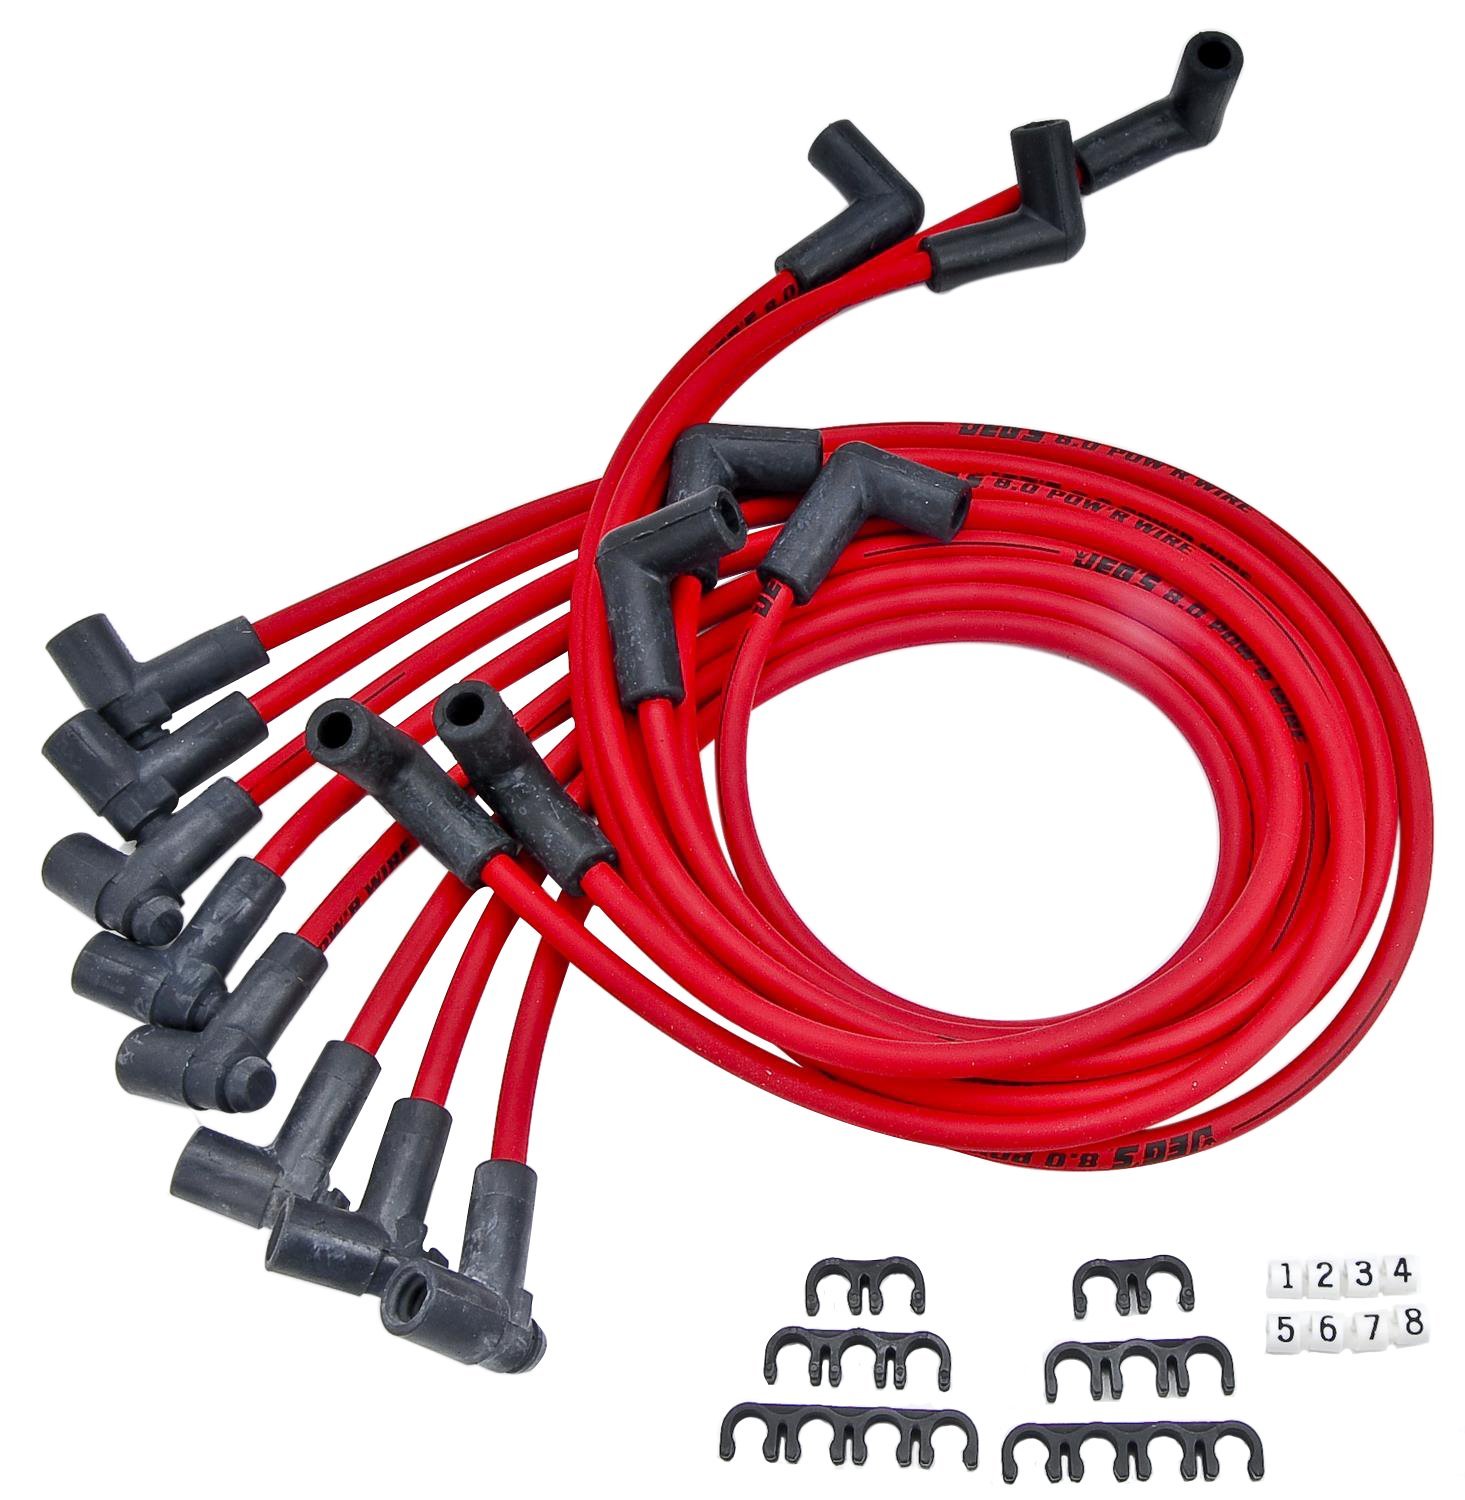 JEGS 555-40299: Hi-Temp Sleeved Spark Plug Wire Set, Fits Small Block  Chevy 262-400 w/HEI Distributor, 8 mm Red, Over Valve Cover Design, 90- degree HEI Distributor Boots